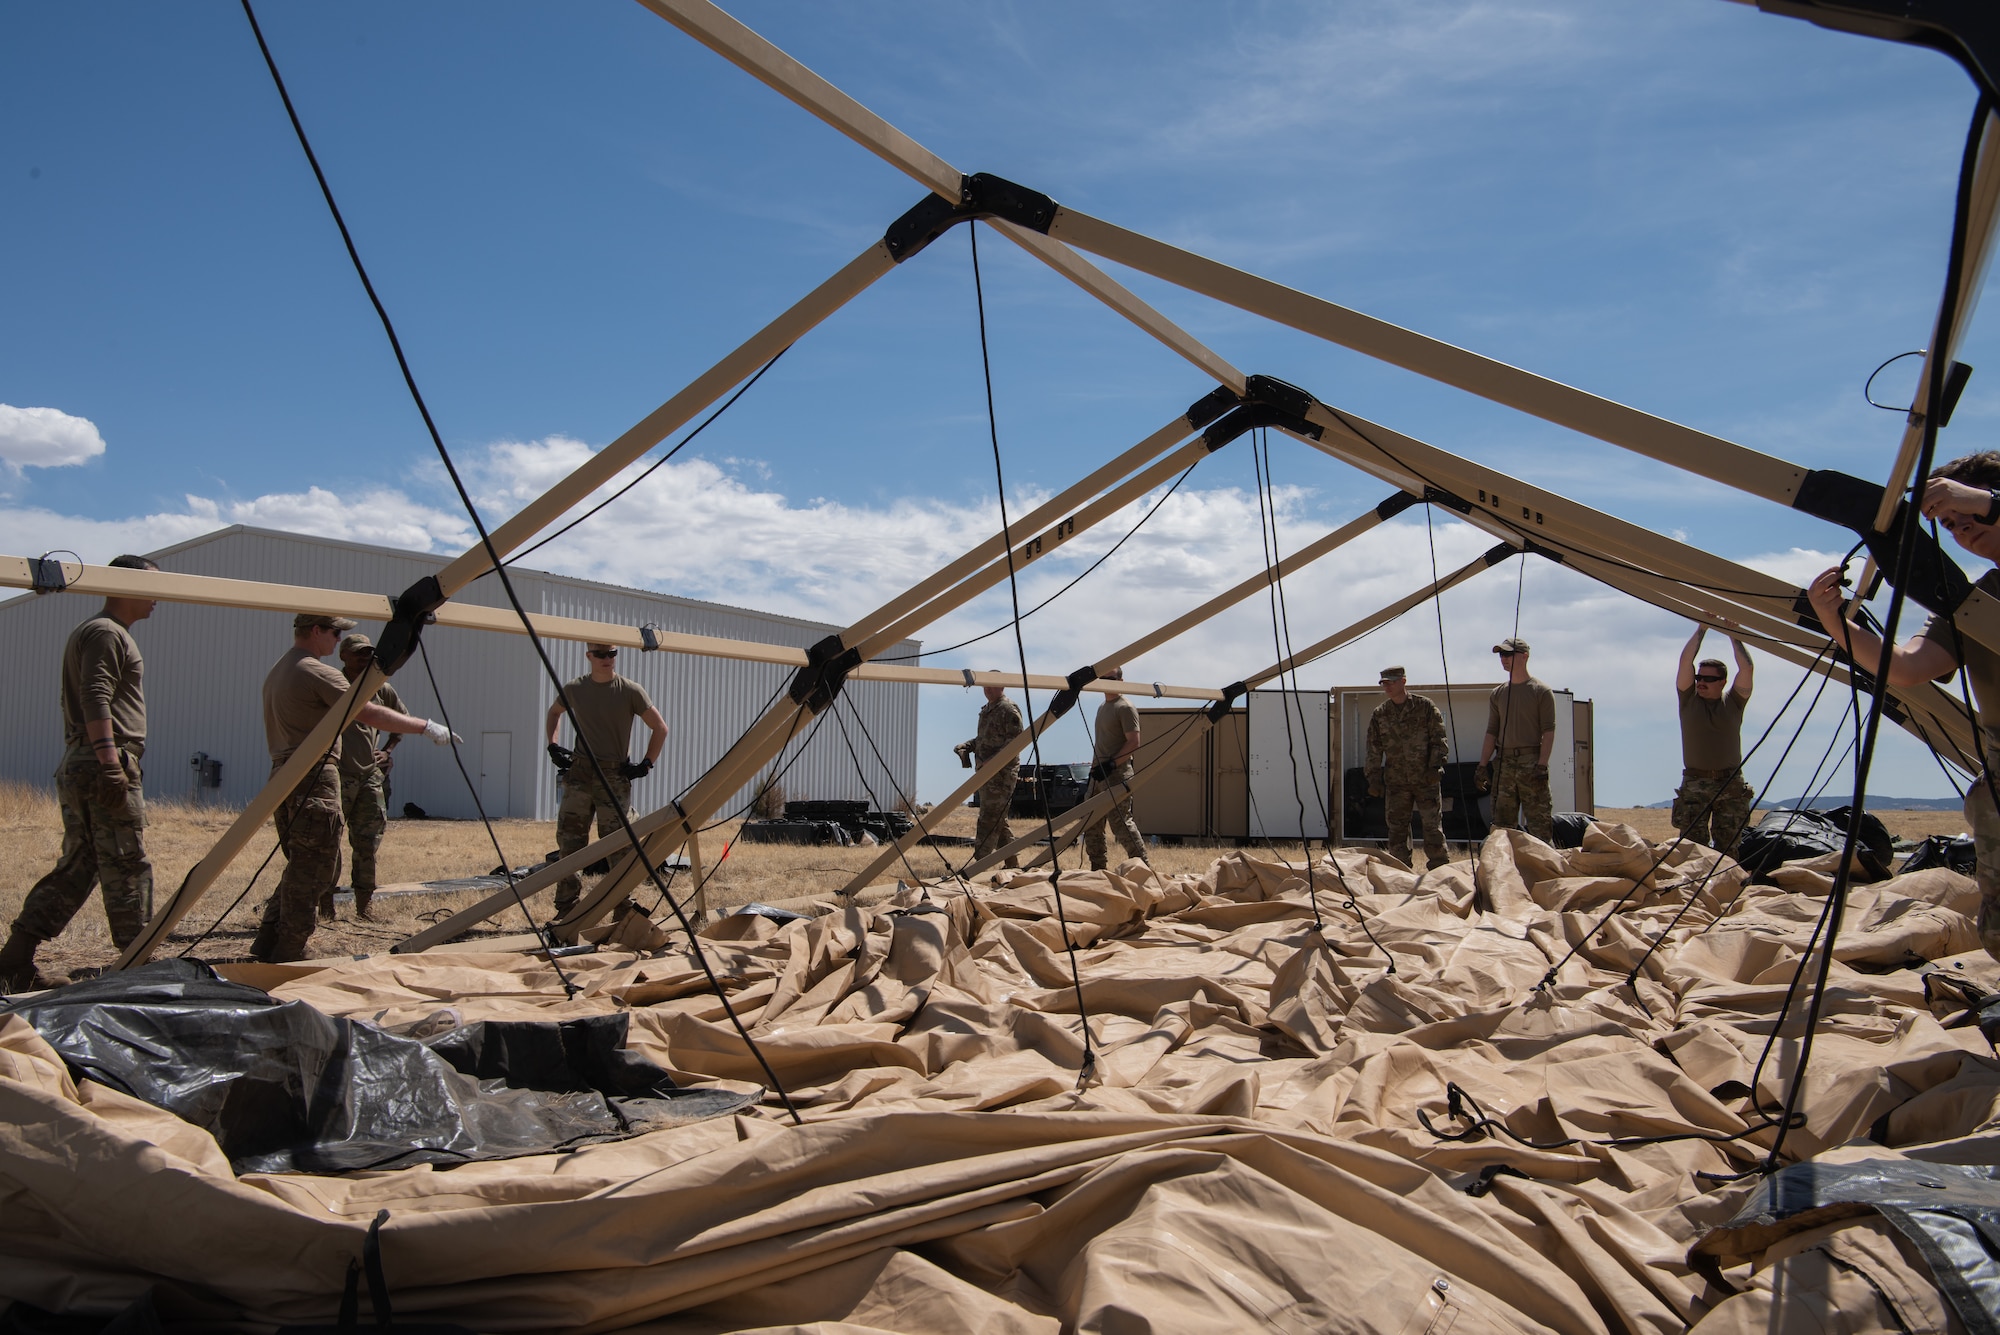 Air Commandos from the 27th Special Operations Mission Support Group, Detachment 1 Mission Sustainment Team 2 set use ropes and pulleys to pitch a Utilis TXL-80 tent at their contingency location during the Full Mission Profile 22-3 exercise at Sierra Blanca Regional Airport, New Mexico. (U.S. Air Force photo by Airman 1st Class Alexis Sandoval)